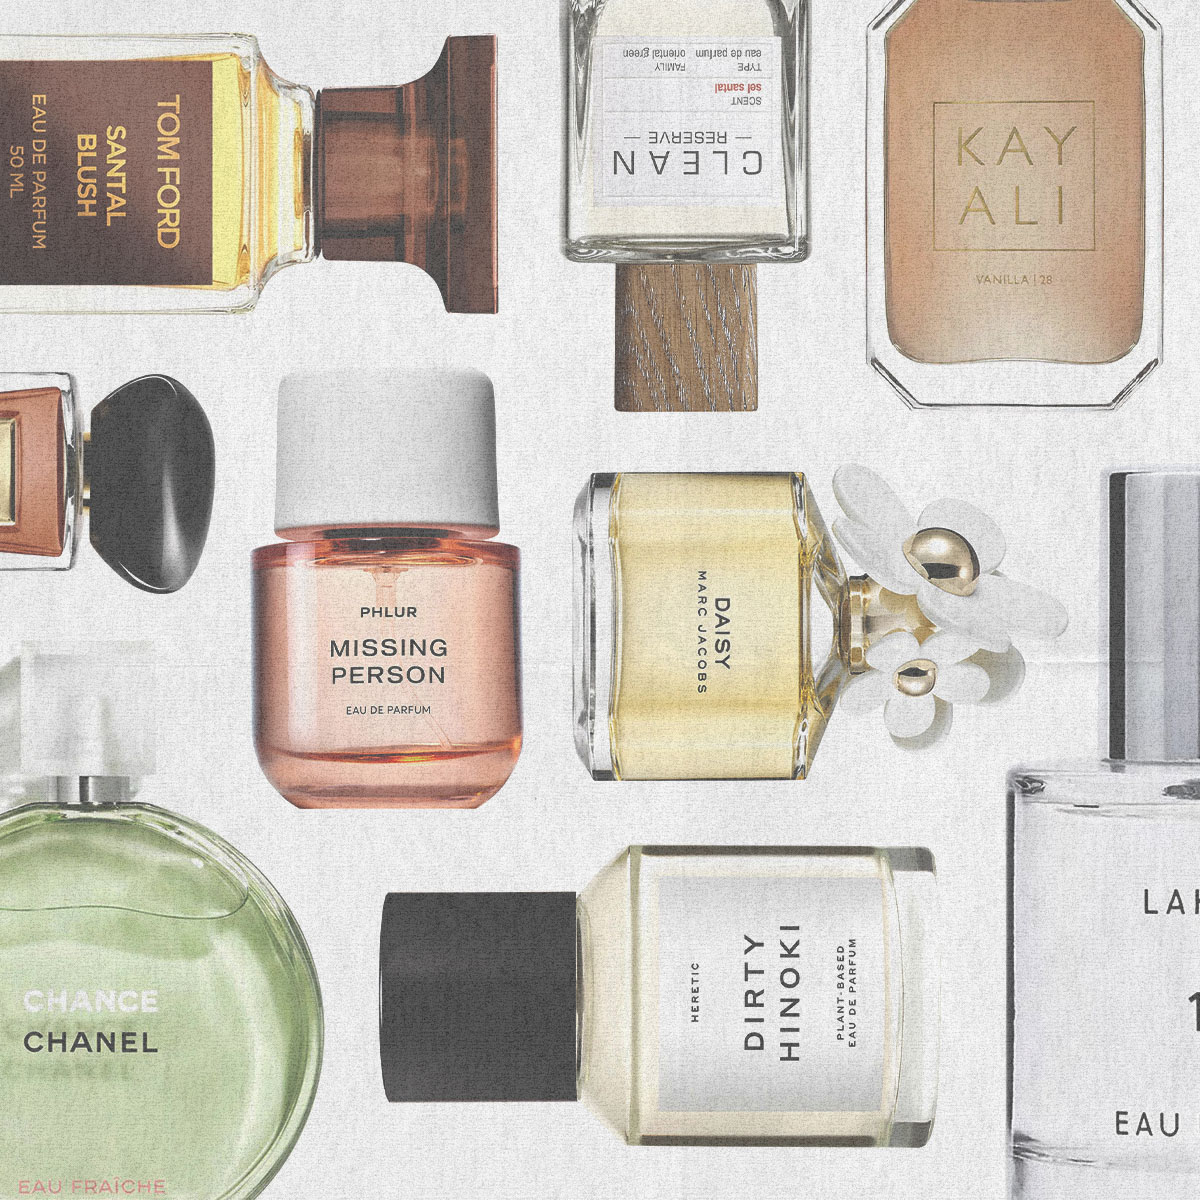 Read Me If You Want to Learn How to Layer Your Fragrances